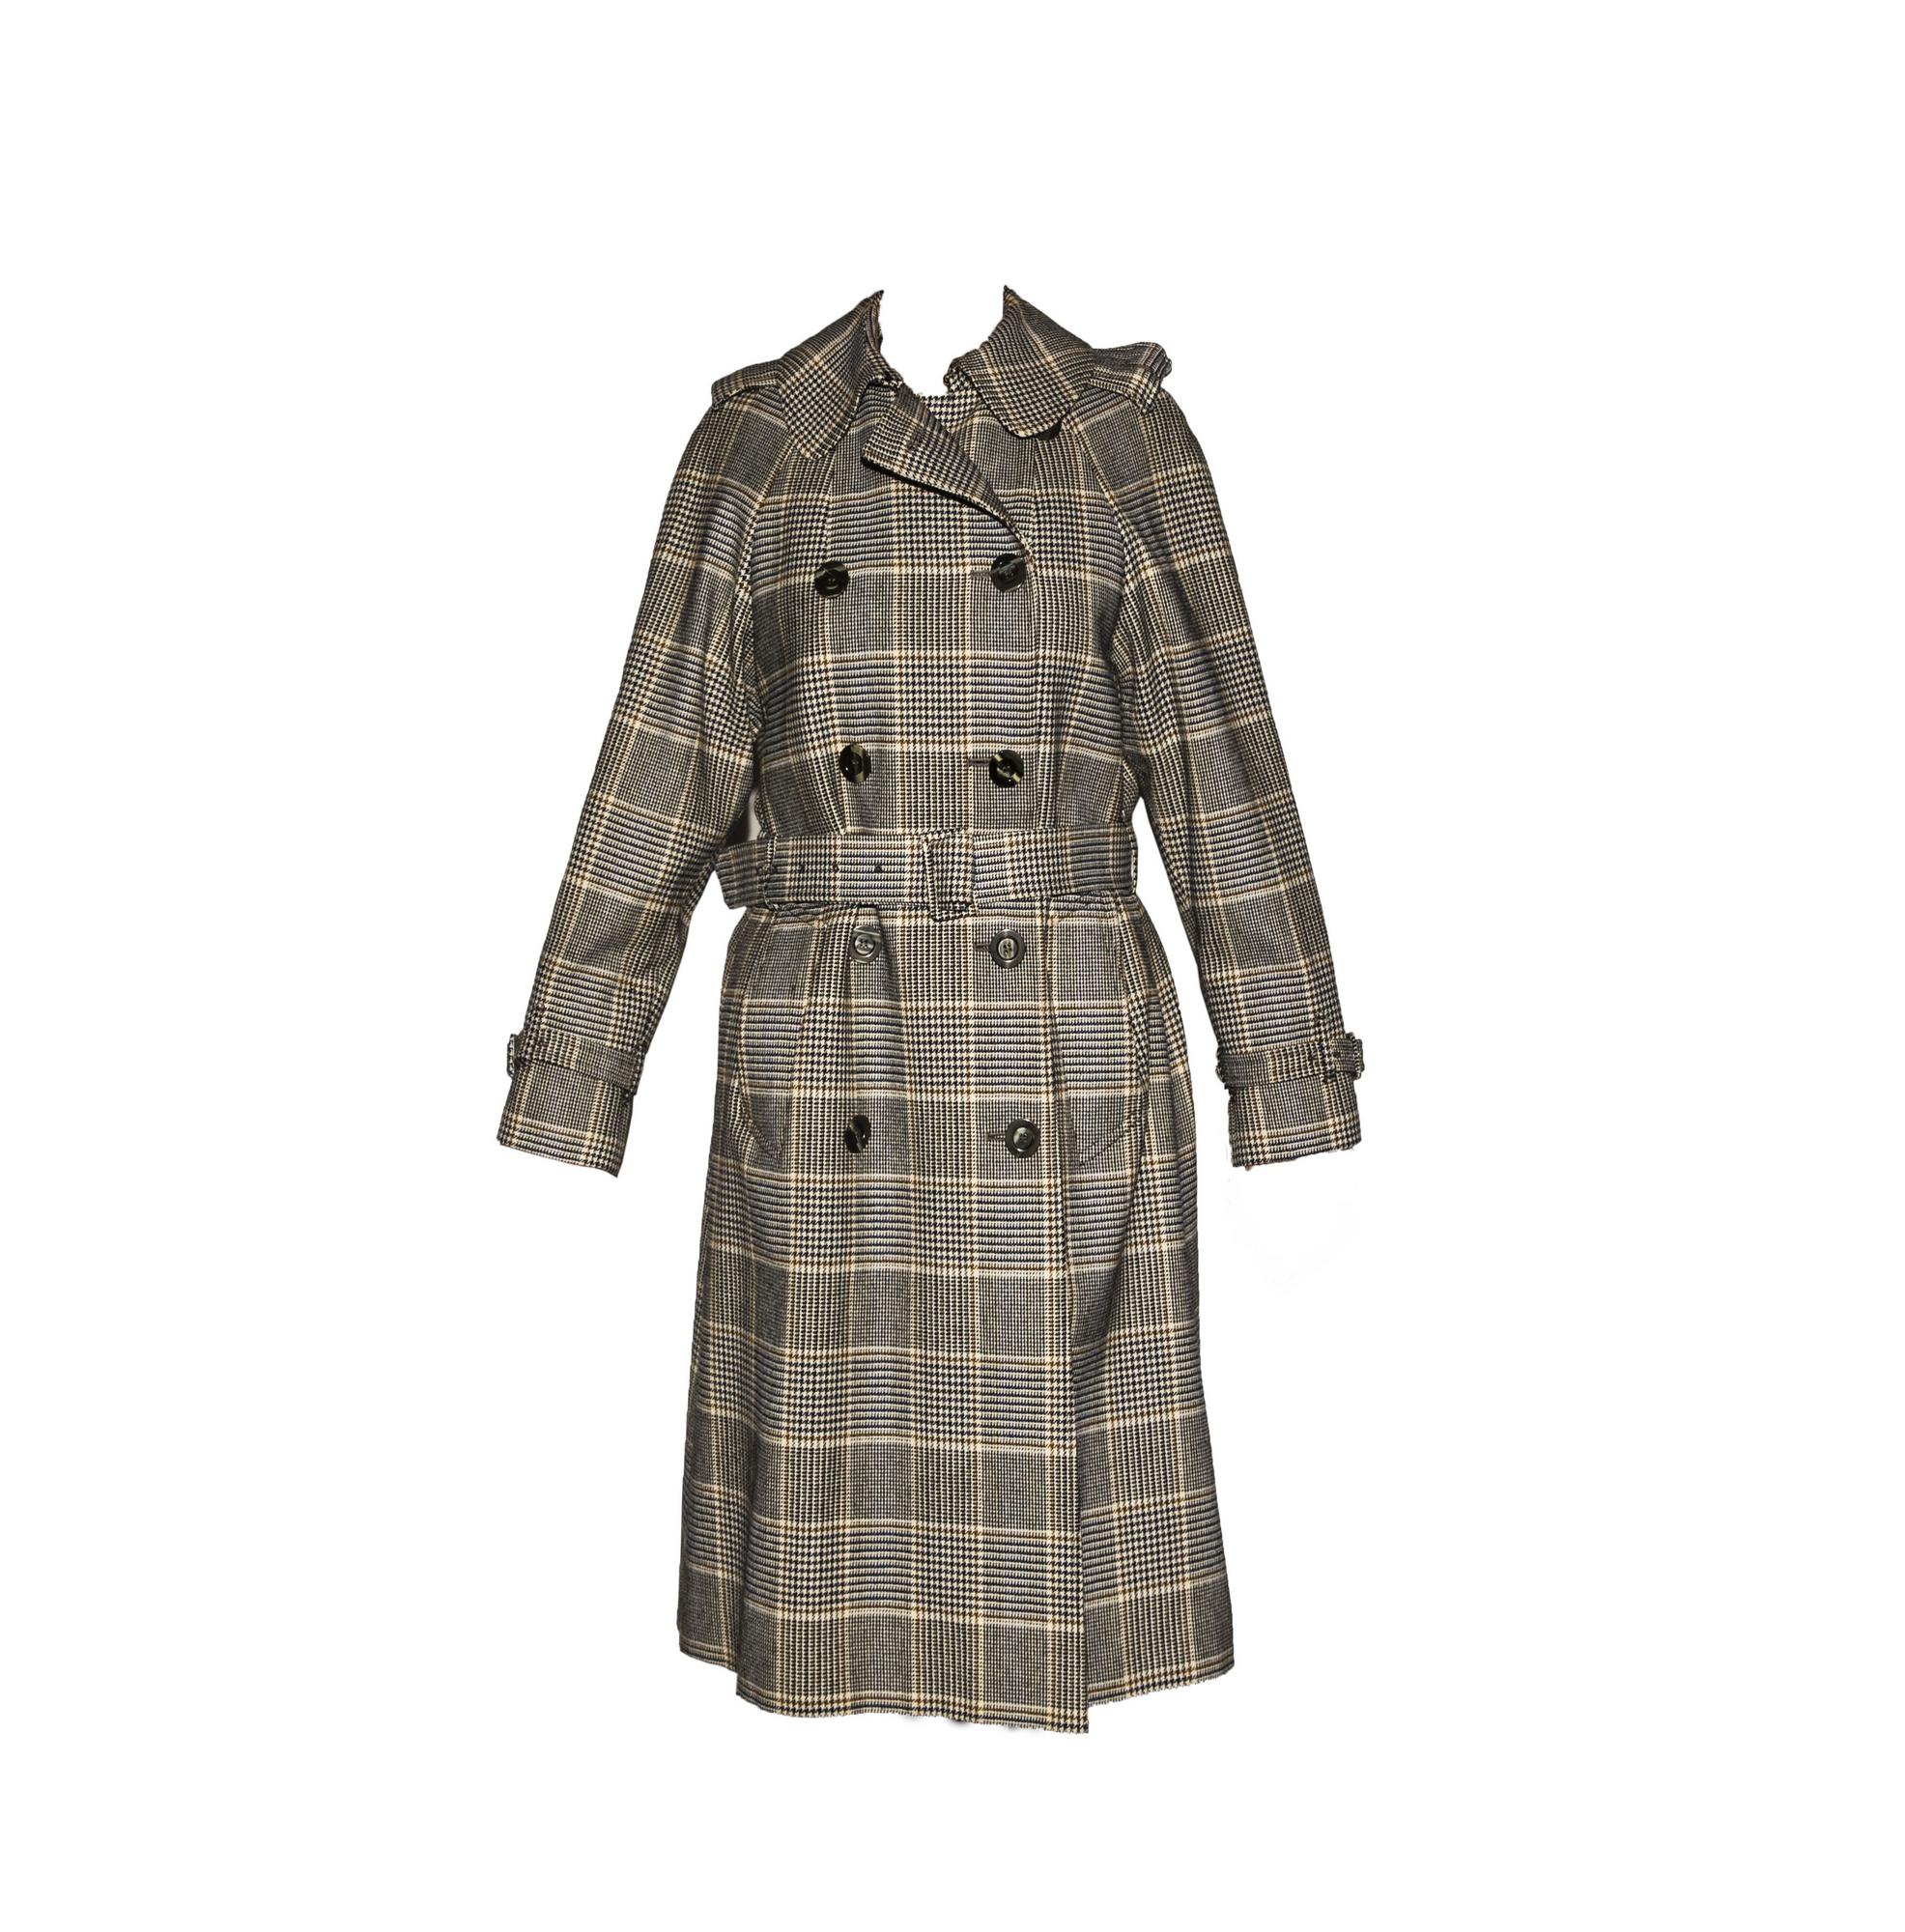 Aquascutum TRENCH COAT Description: Trench coat in tweed wool with Prince of...